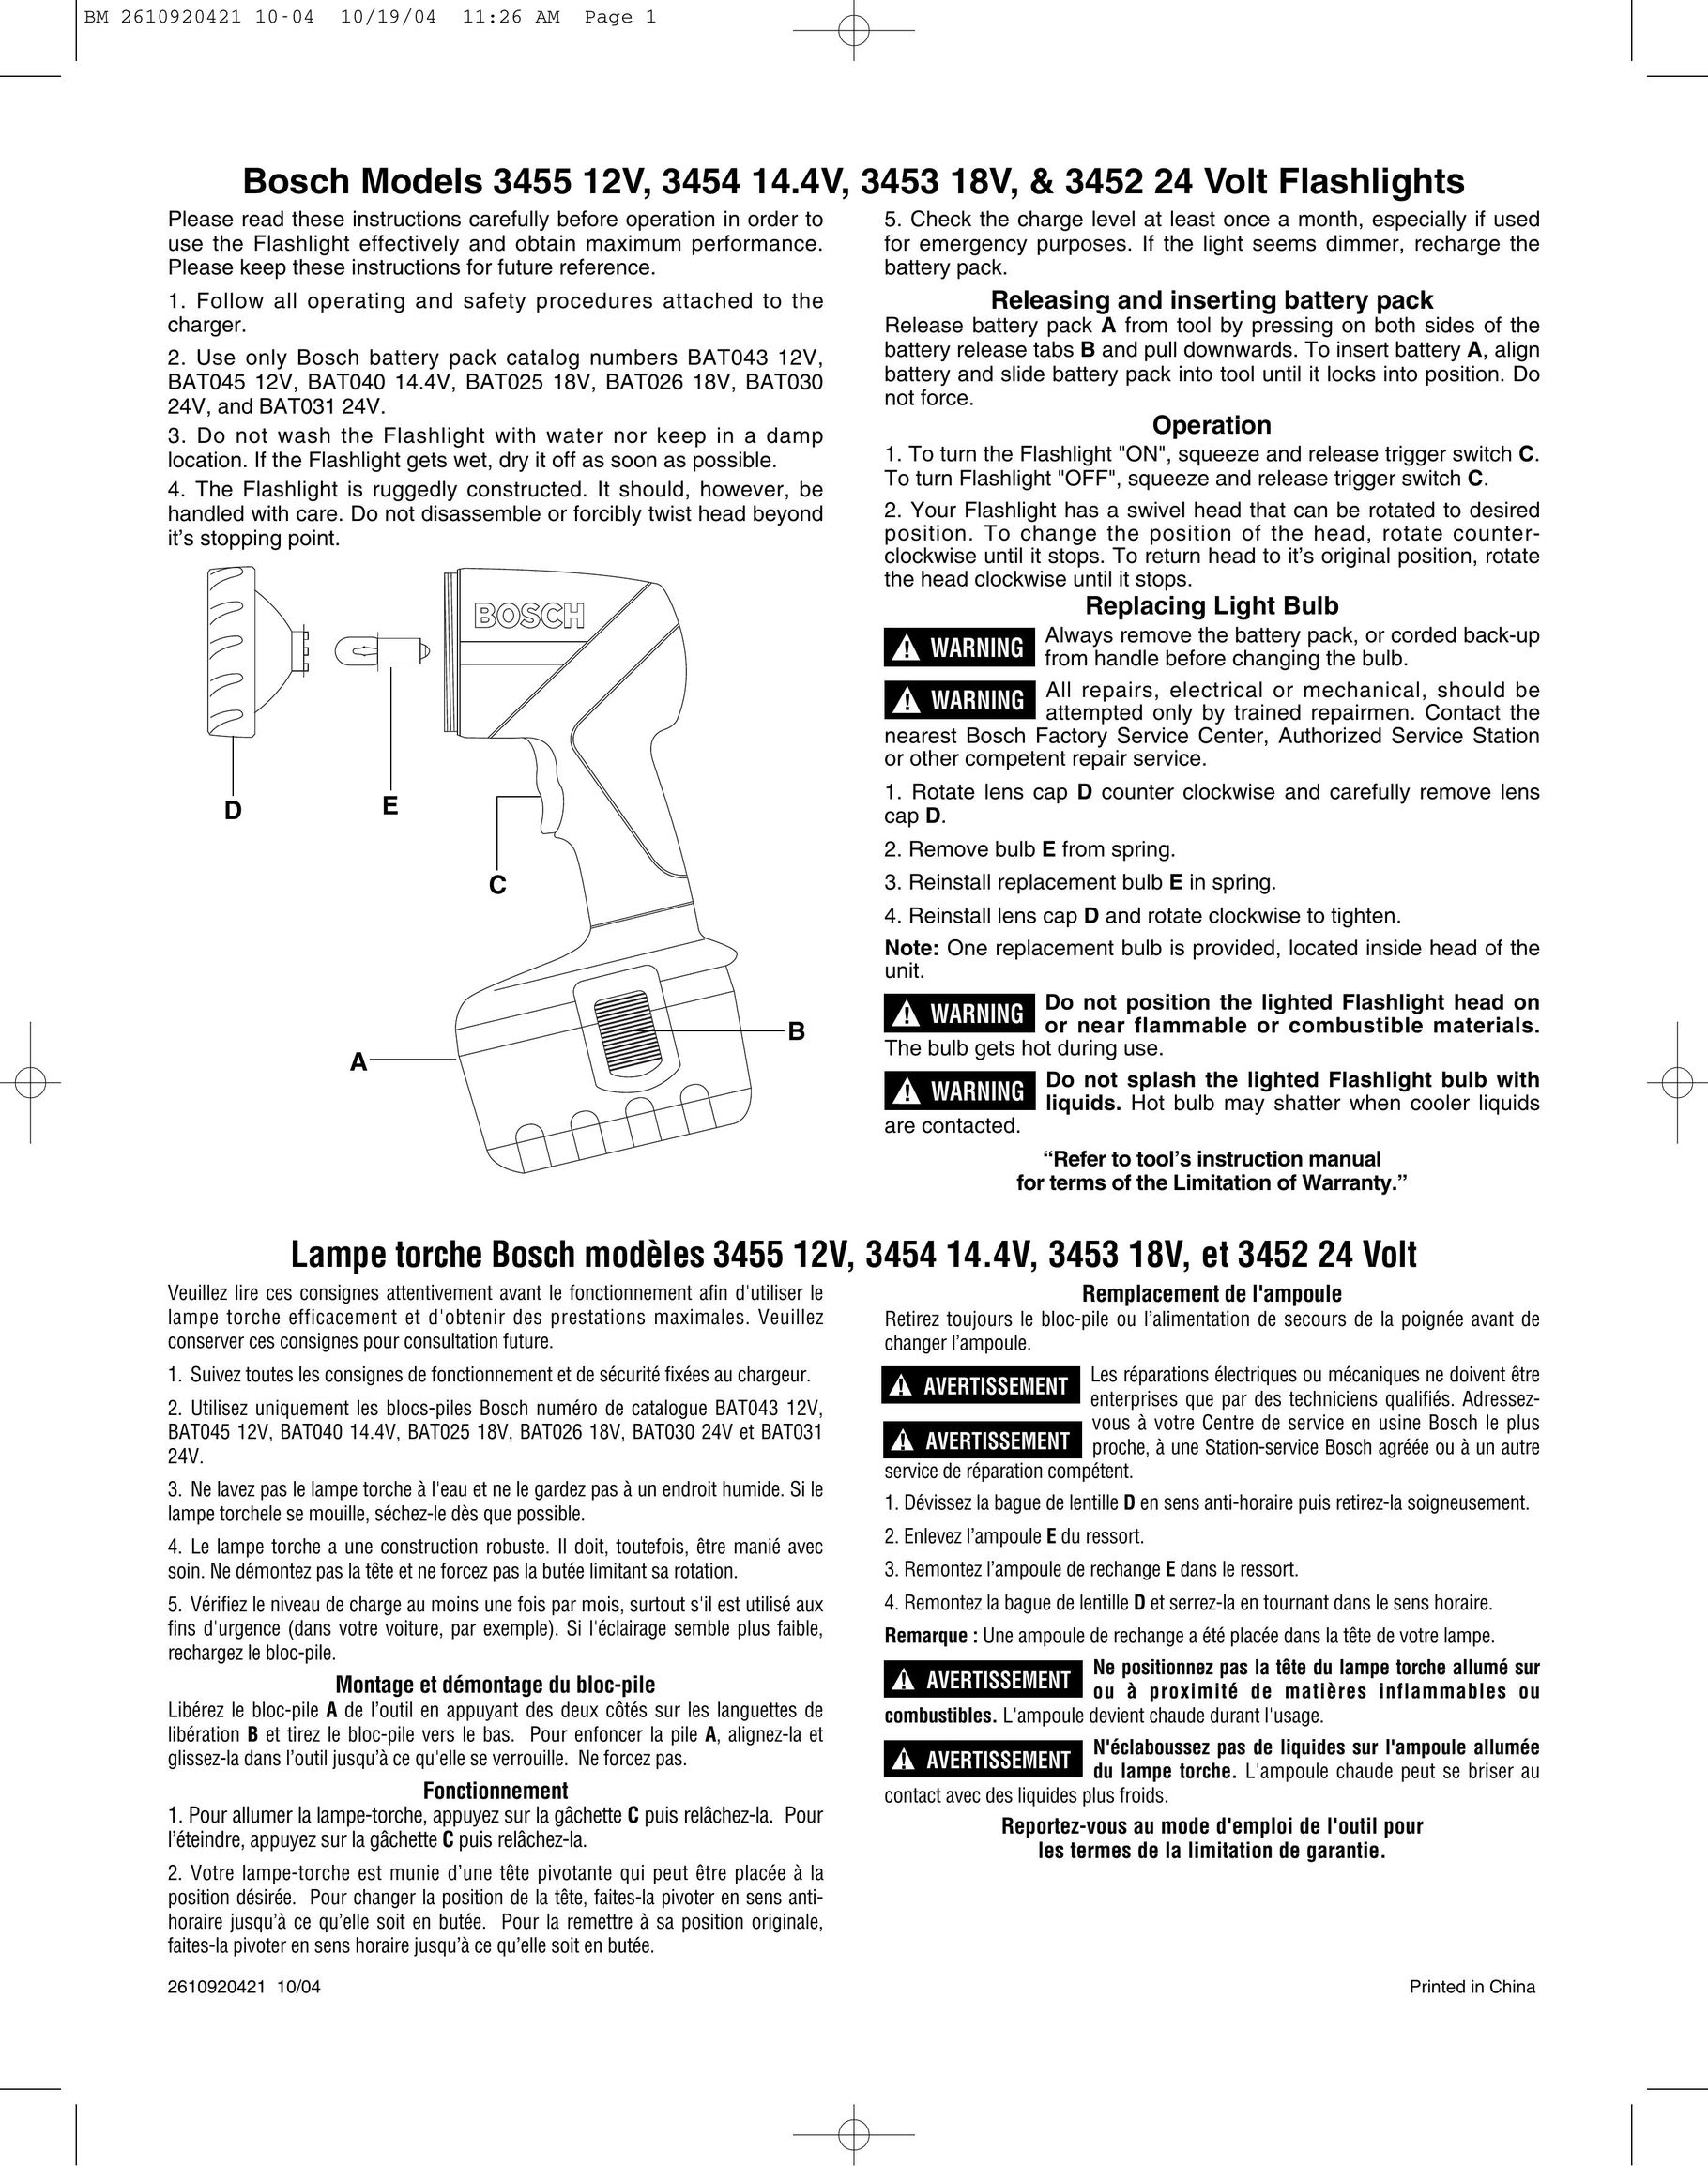 Bosch Appliances 3455 12V Home Safety Product User Manual